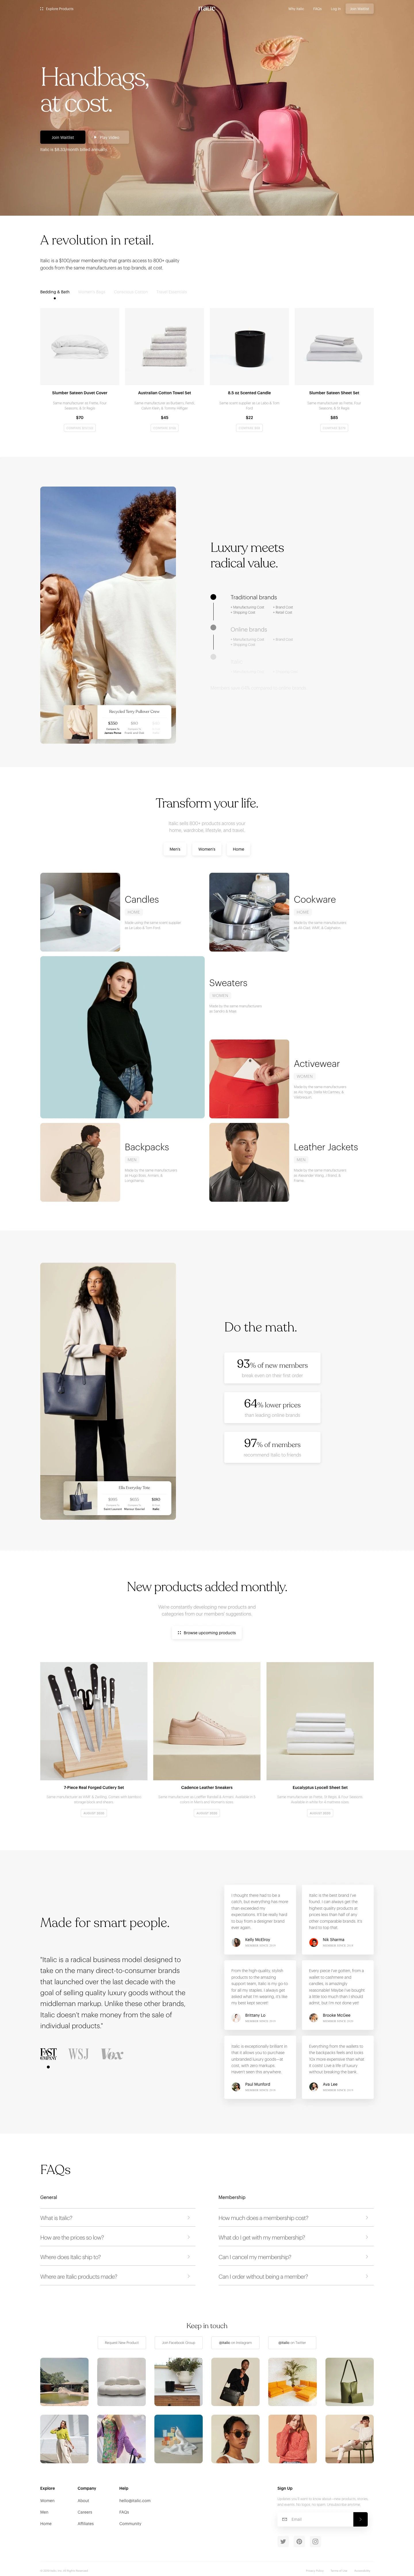 Italic Landing Page Example: Access 800+ quality goods from the same manufacturers as top brands, with zero markups.